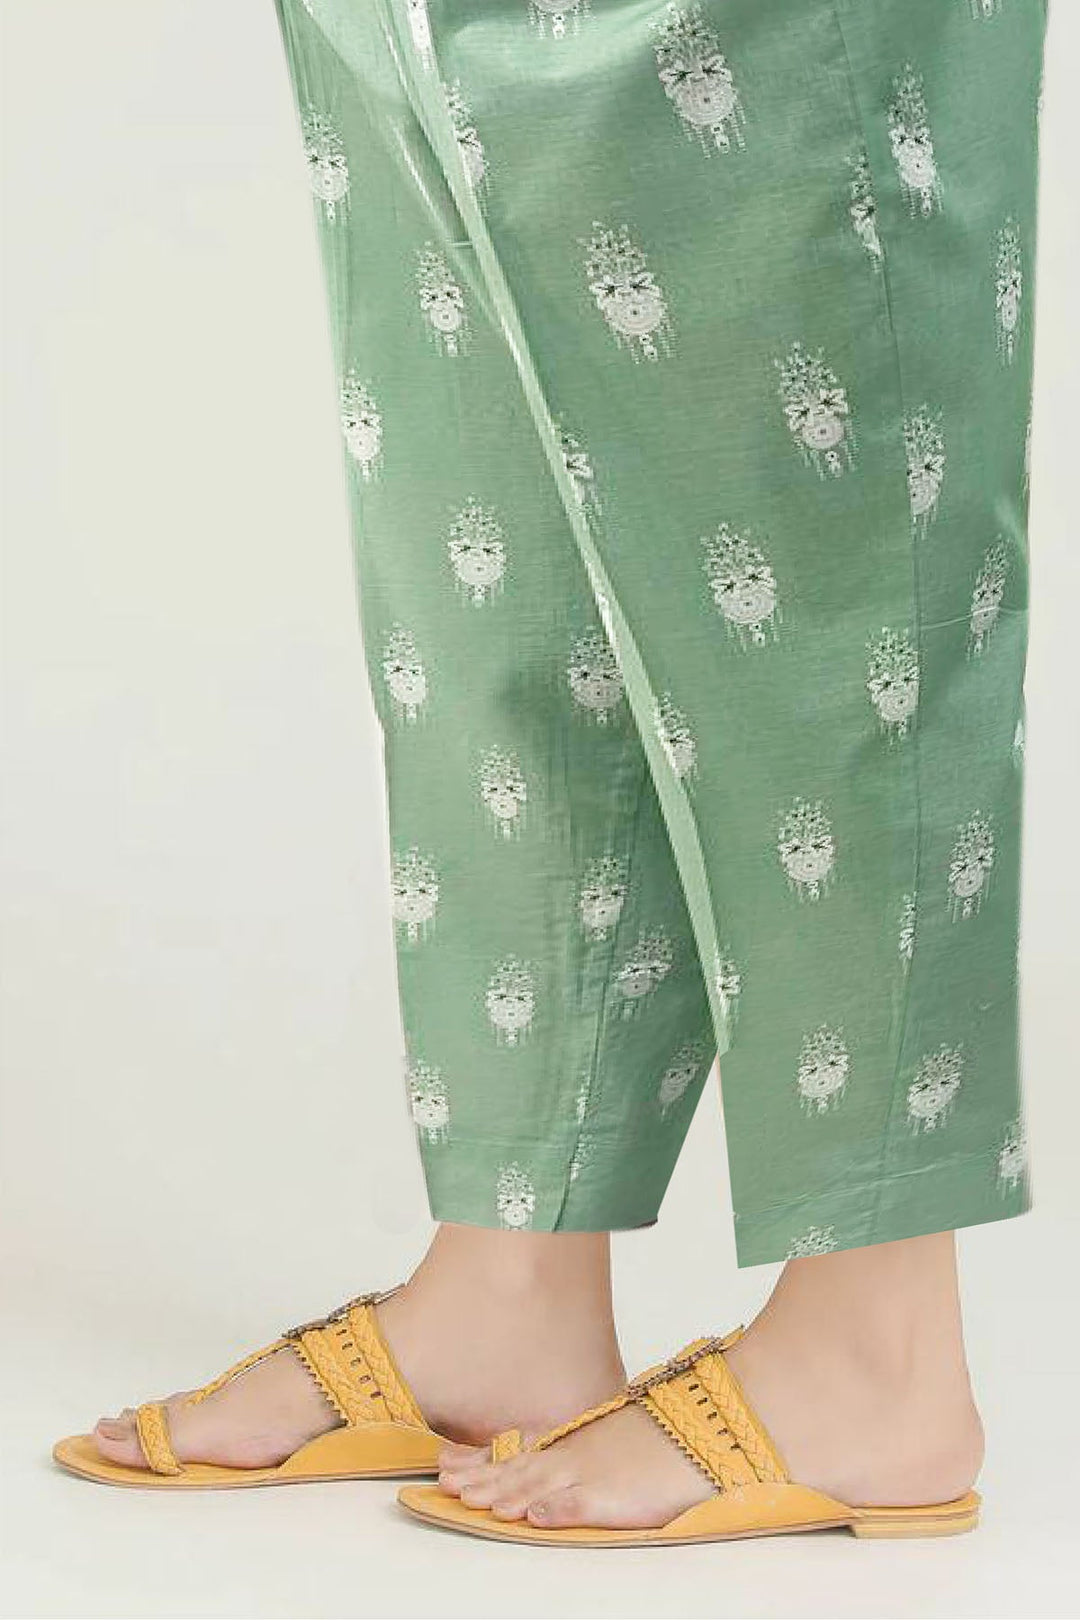 4194-PRINT-A PRINTED TROUSER STITCHED